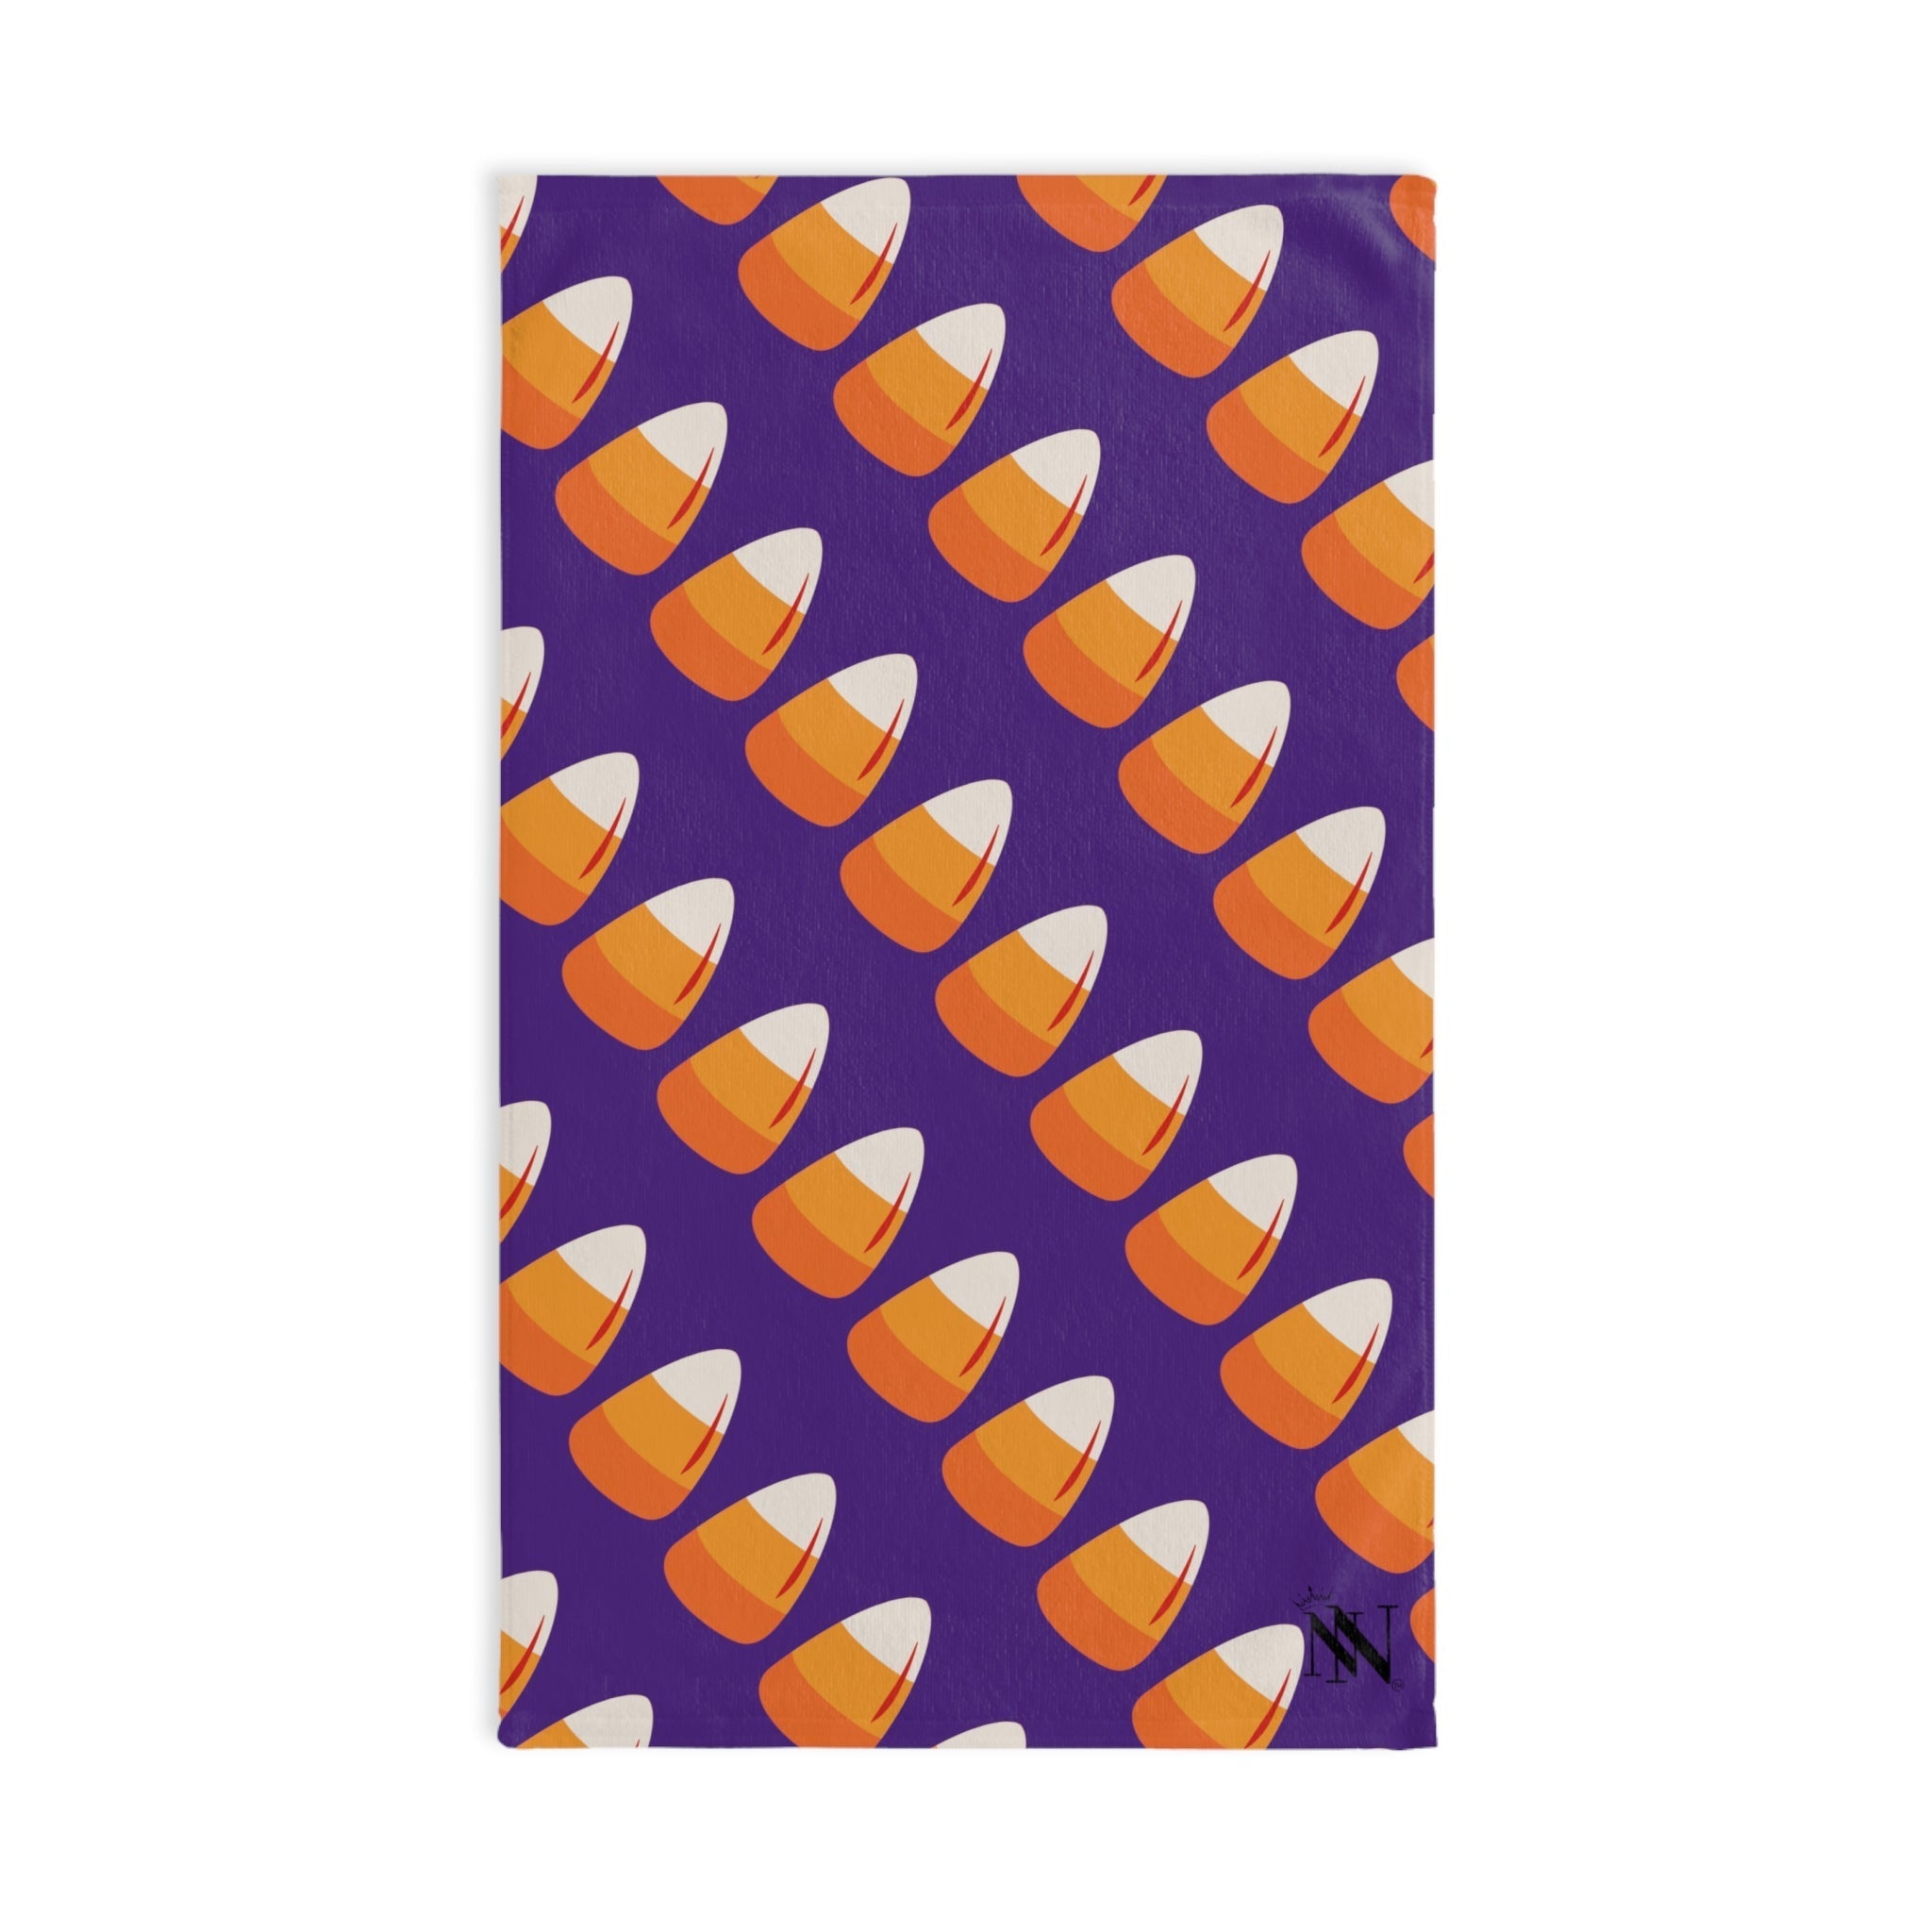 Candy Corn Purple | Funny Gifts for Men - Gifts for Him - Birthday Gifts for Men, Him, Husband, Boyfriend, New Couple Gifts, Fathers & Valentines Day Gifts, Christmas Gifts NECTAR NAPKINS